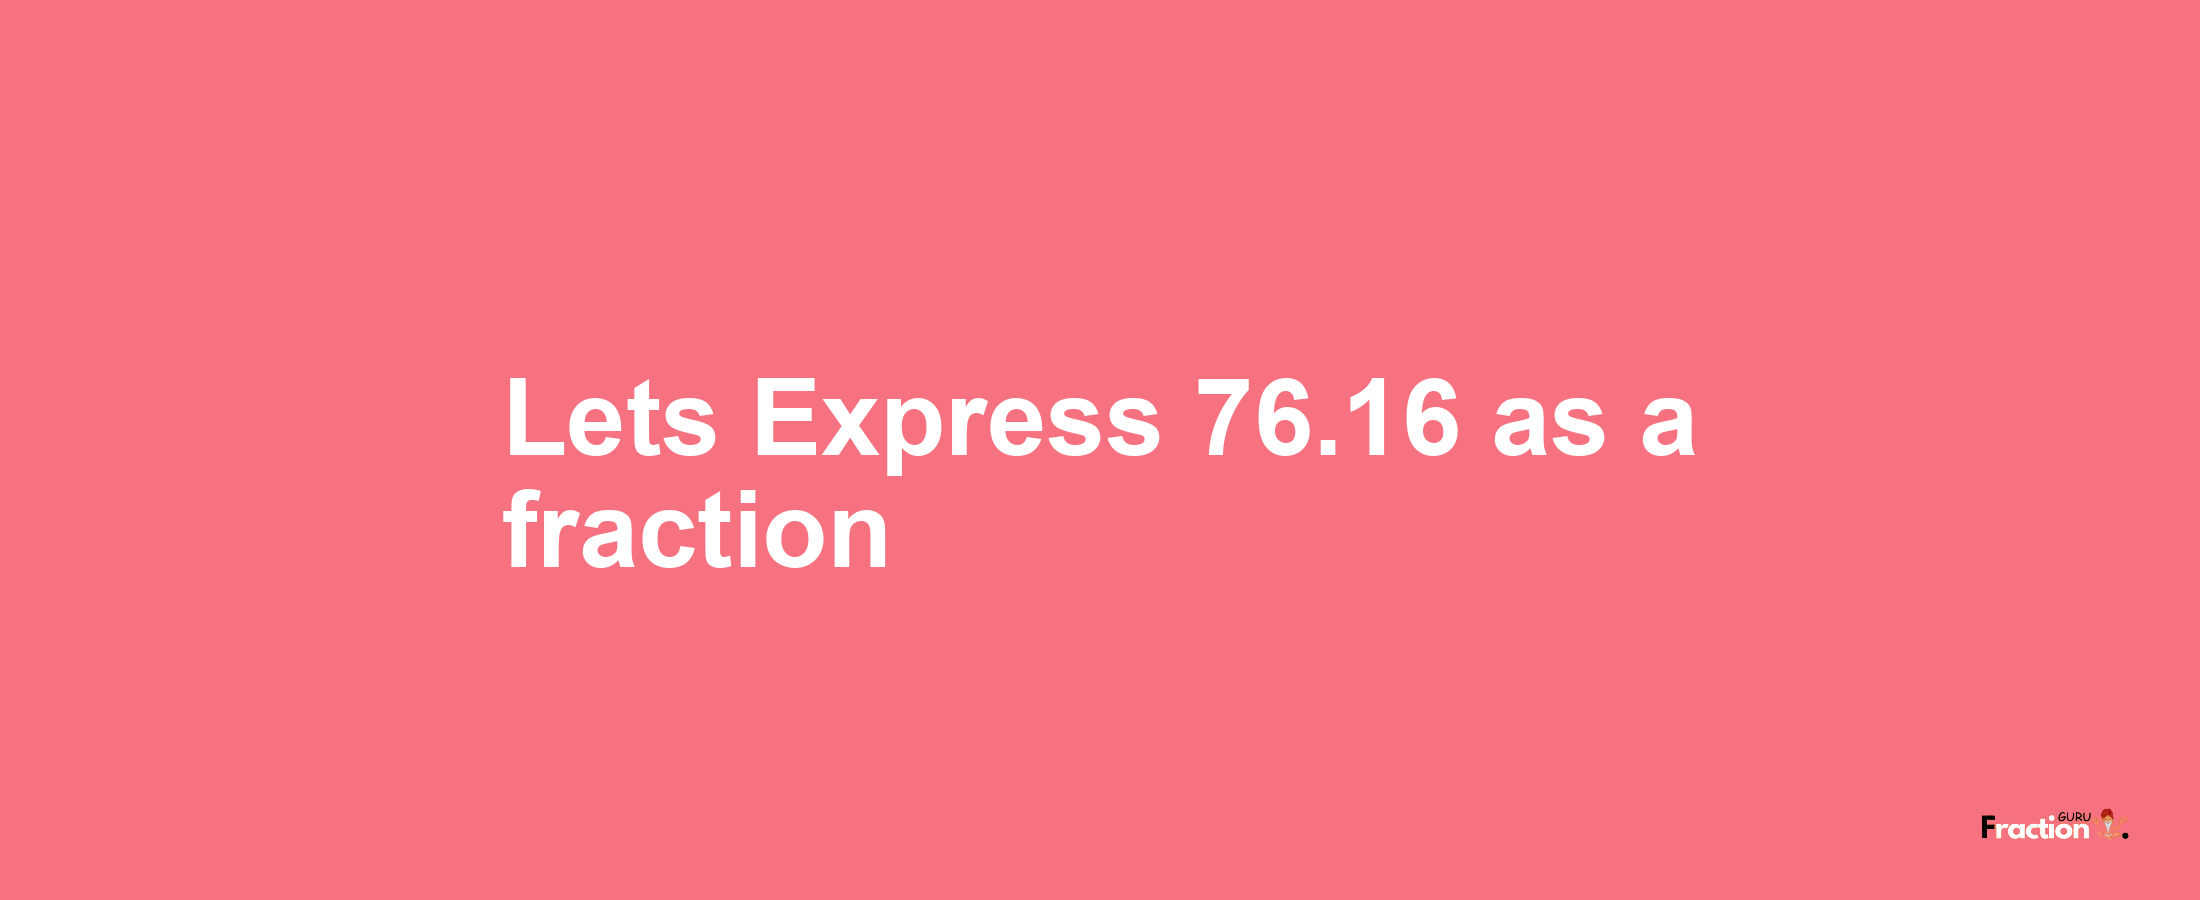 Lets Express 76.16 as afraction